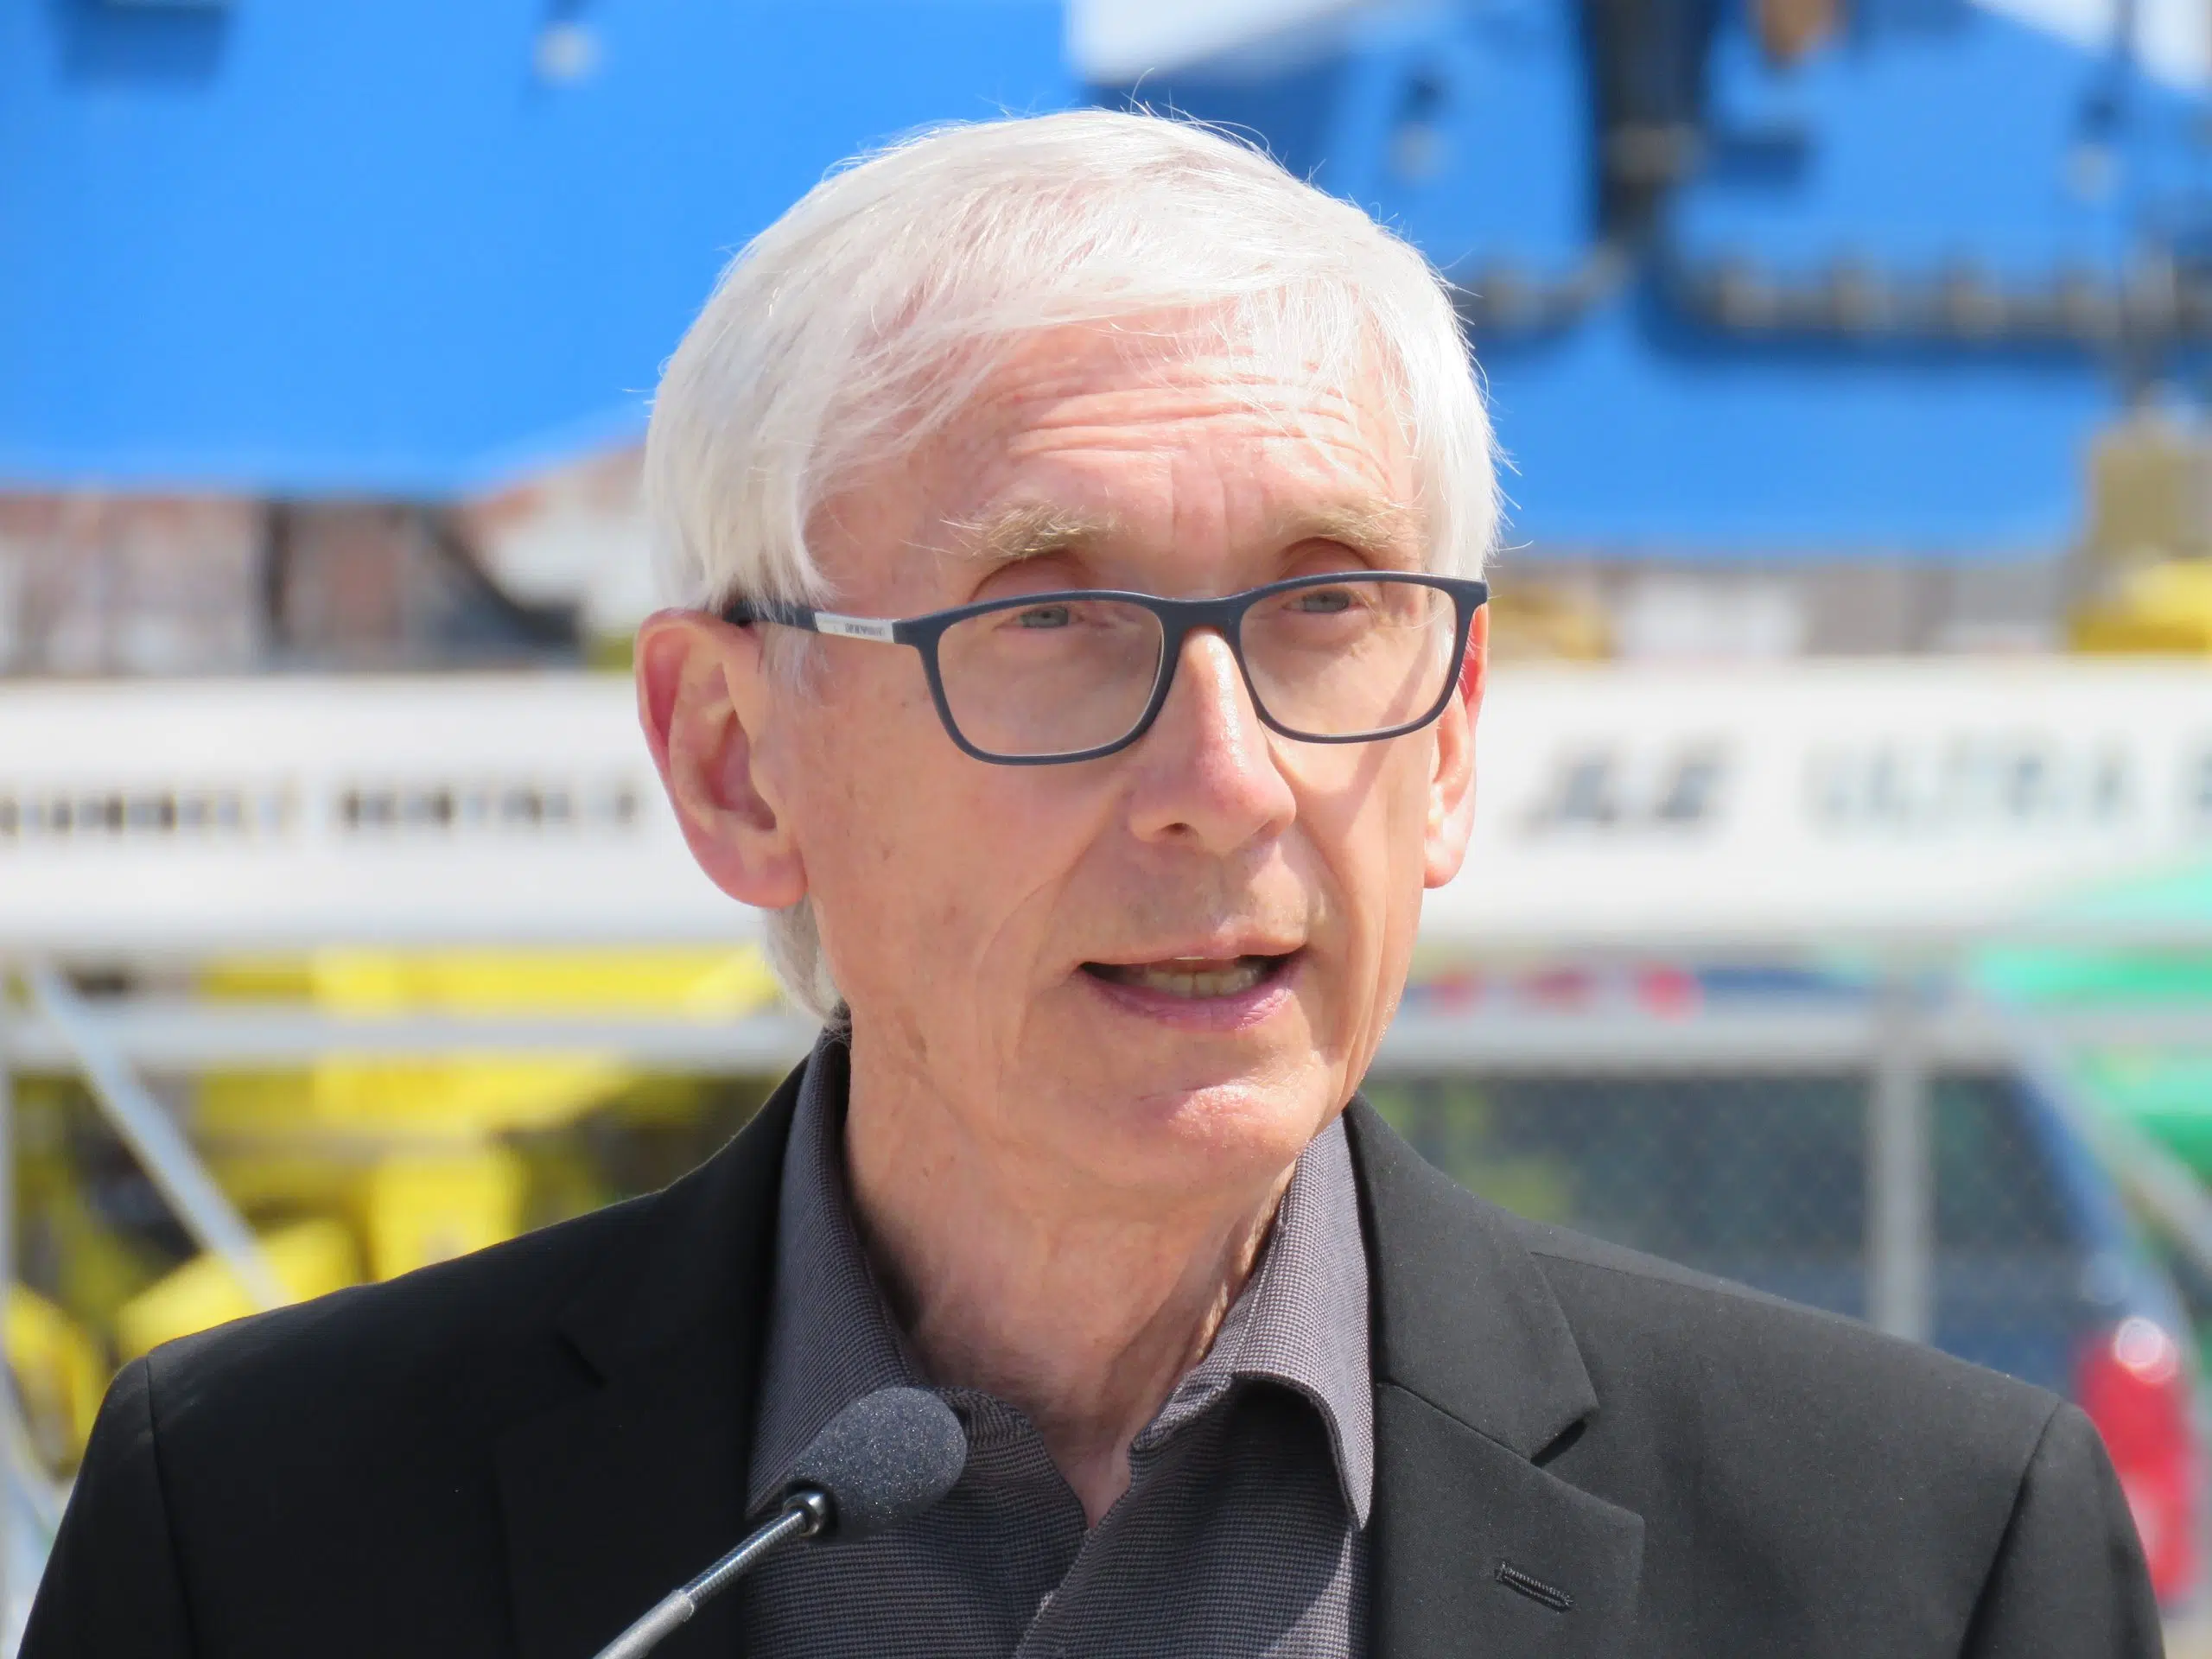 Governor Evers Rejects Proposal to Allow 14 and 15-Year-Olds to Work Without Permits